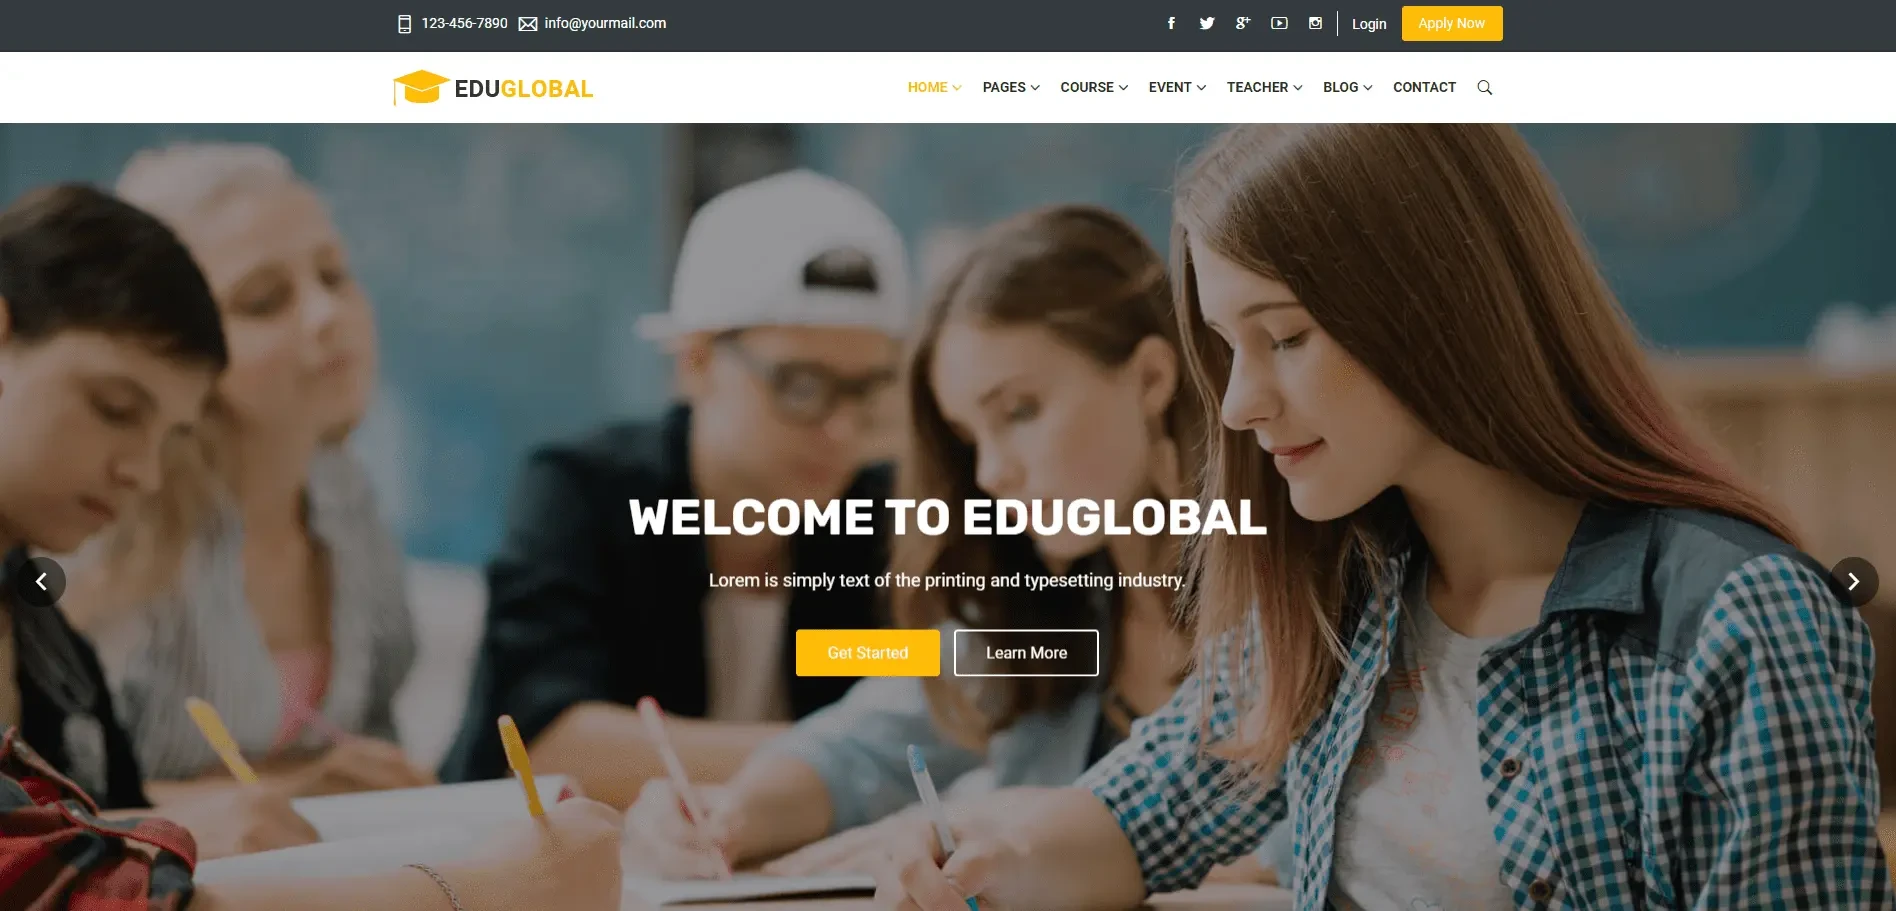 Education LMS and Courses Template for Educational Site